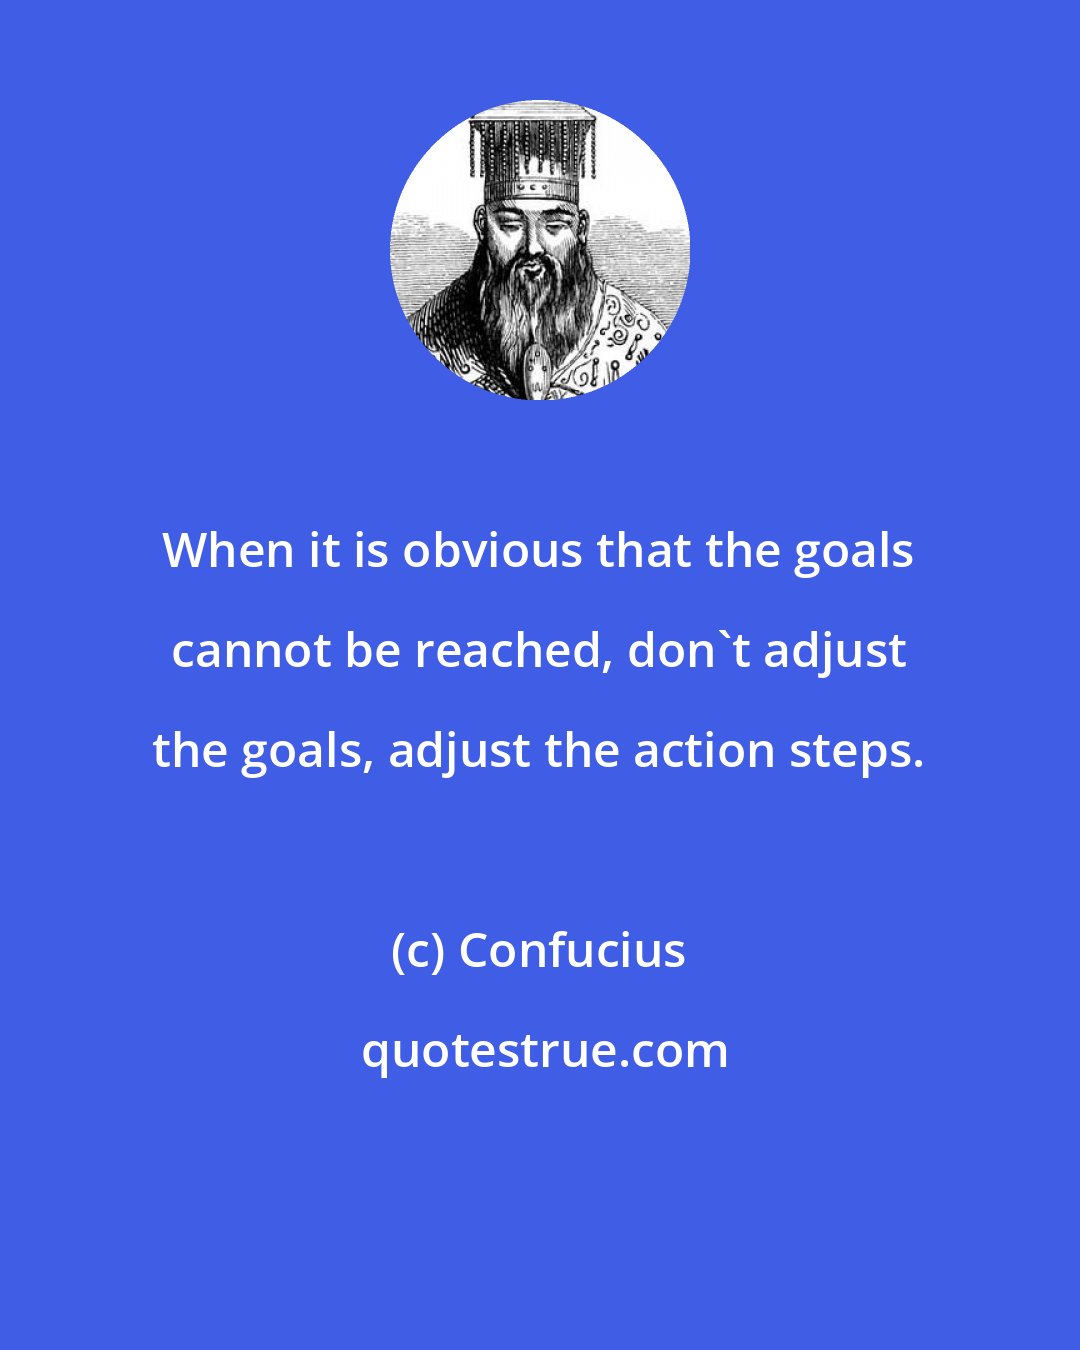 Confucius: When it is obvious that the goals cannot be reached, don't adjust the goals, adjust the action steps.